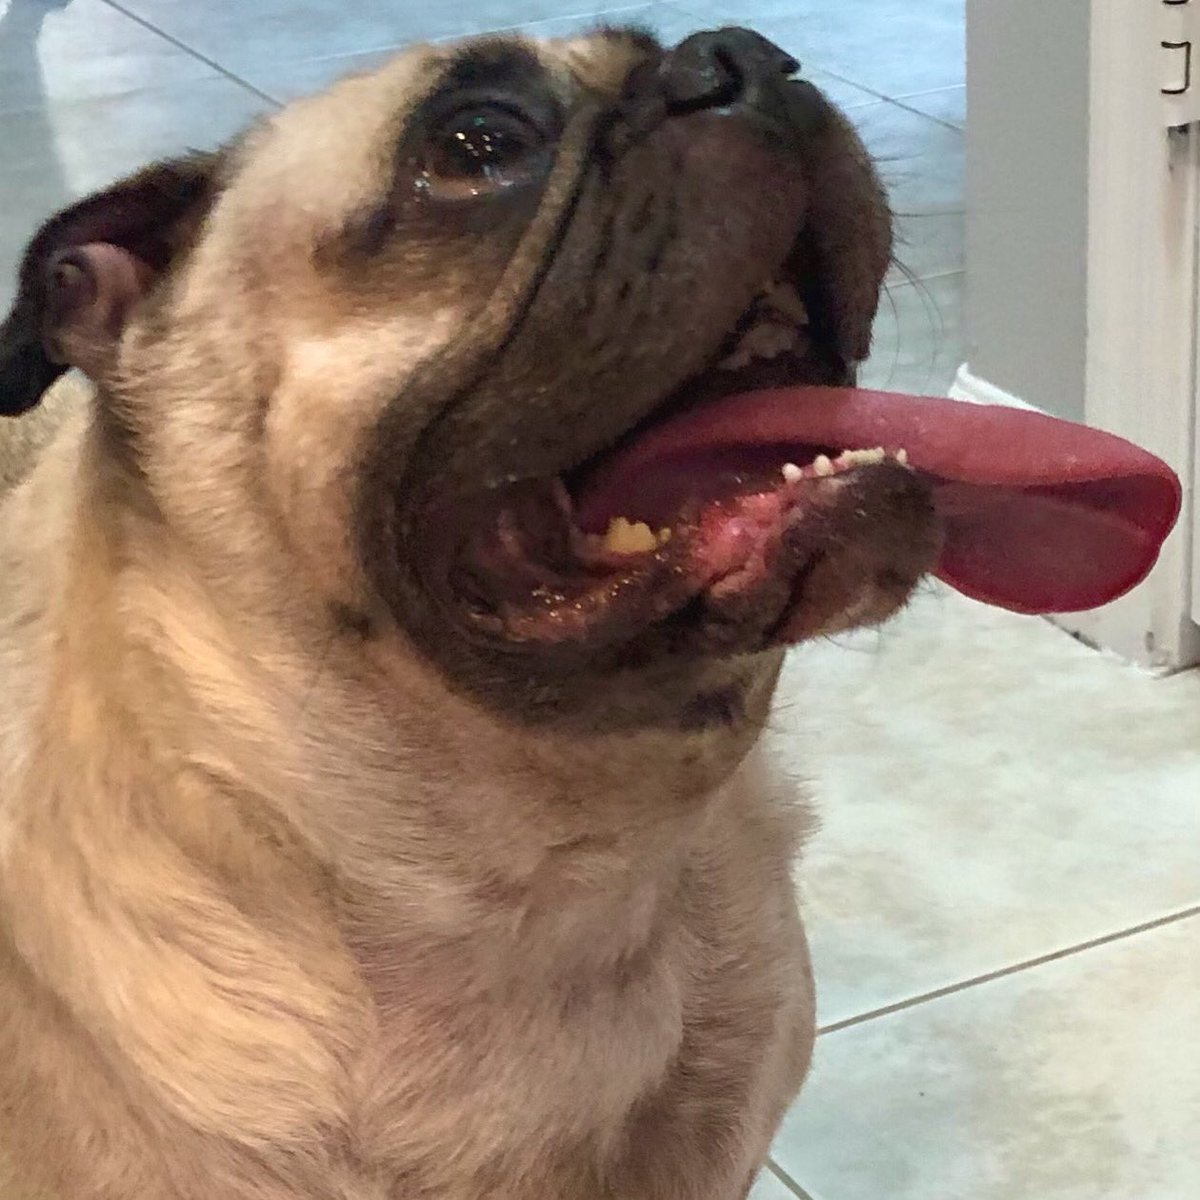 “Outside’s freezies and coffee’s on, but sun’s out, tongue’s out all day long!”🌞-Max

#max #pug #dog #doggo #chill #cold #tongue #sun #sunshine #sunsouttonguesout #zen #happydog #EarthDay #EarthDay2022 #HappyFriday #Friyay #FridayVibes #Coffee #love #loveyoutothemoonandback 👅